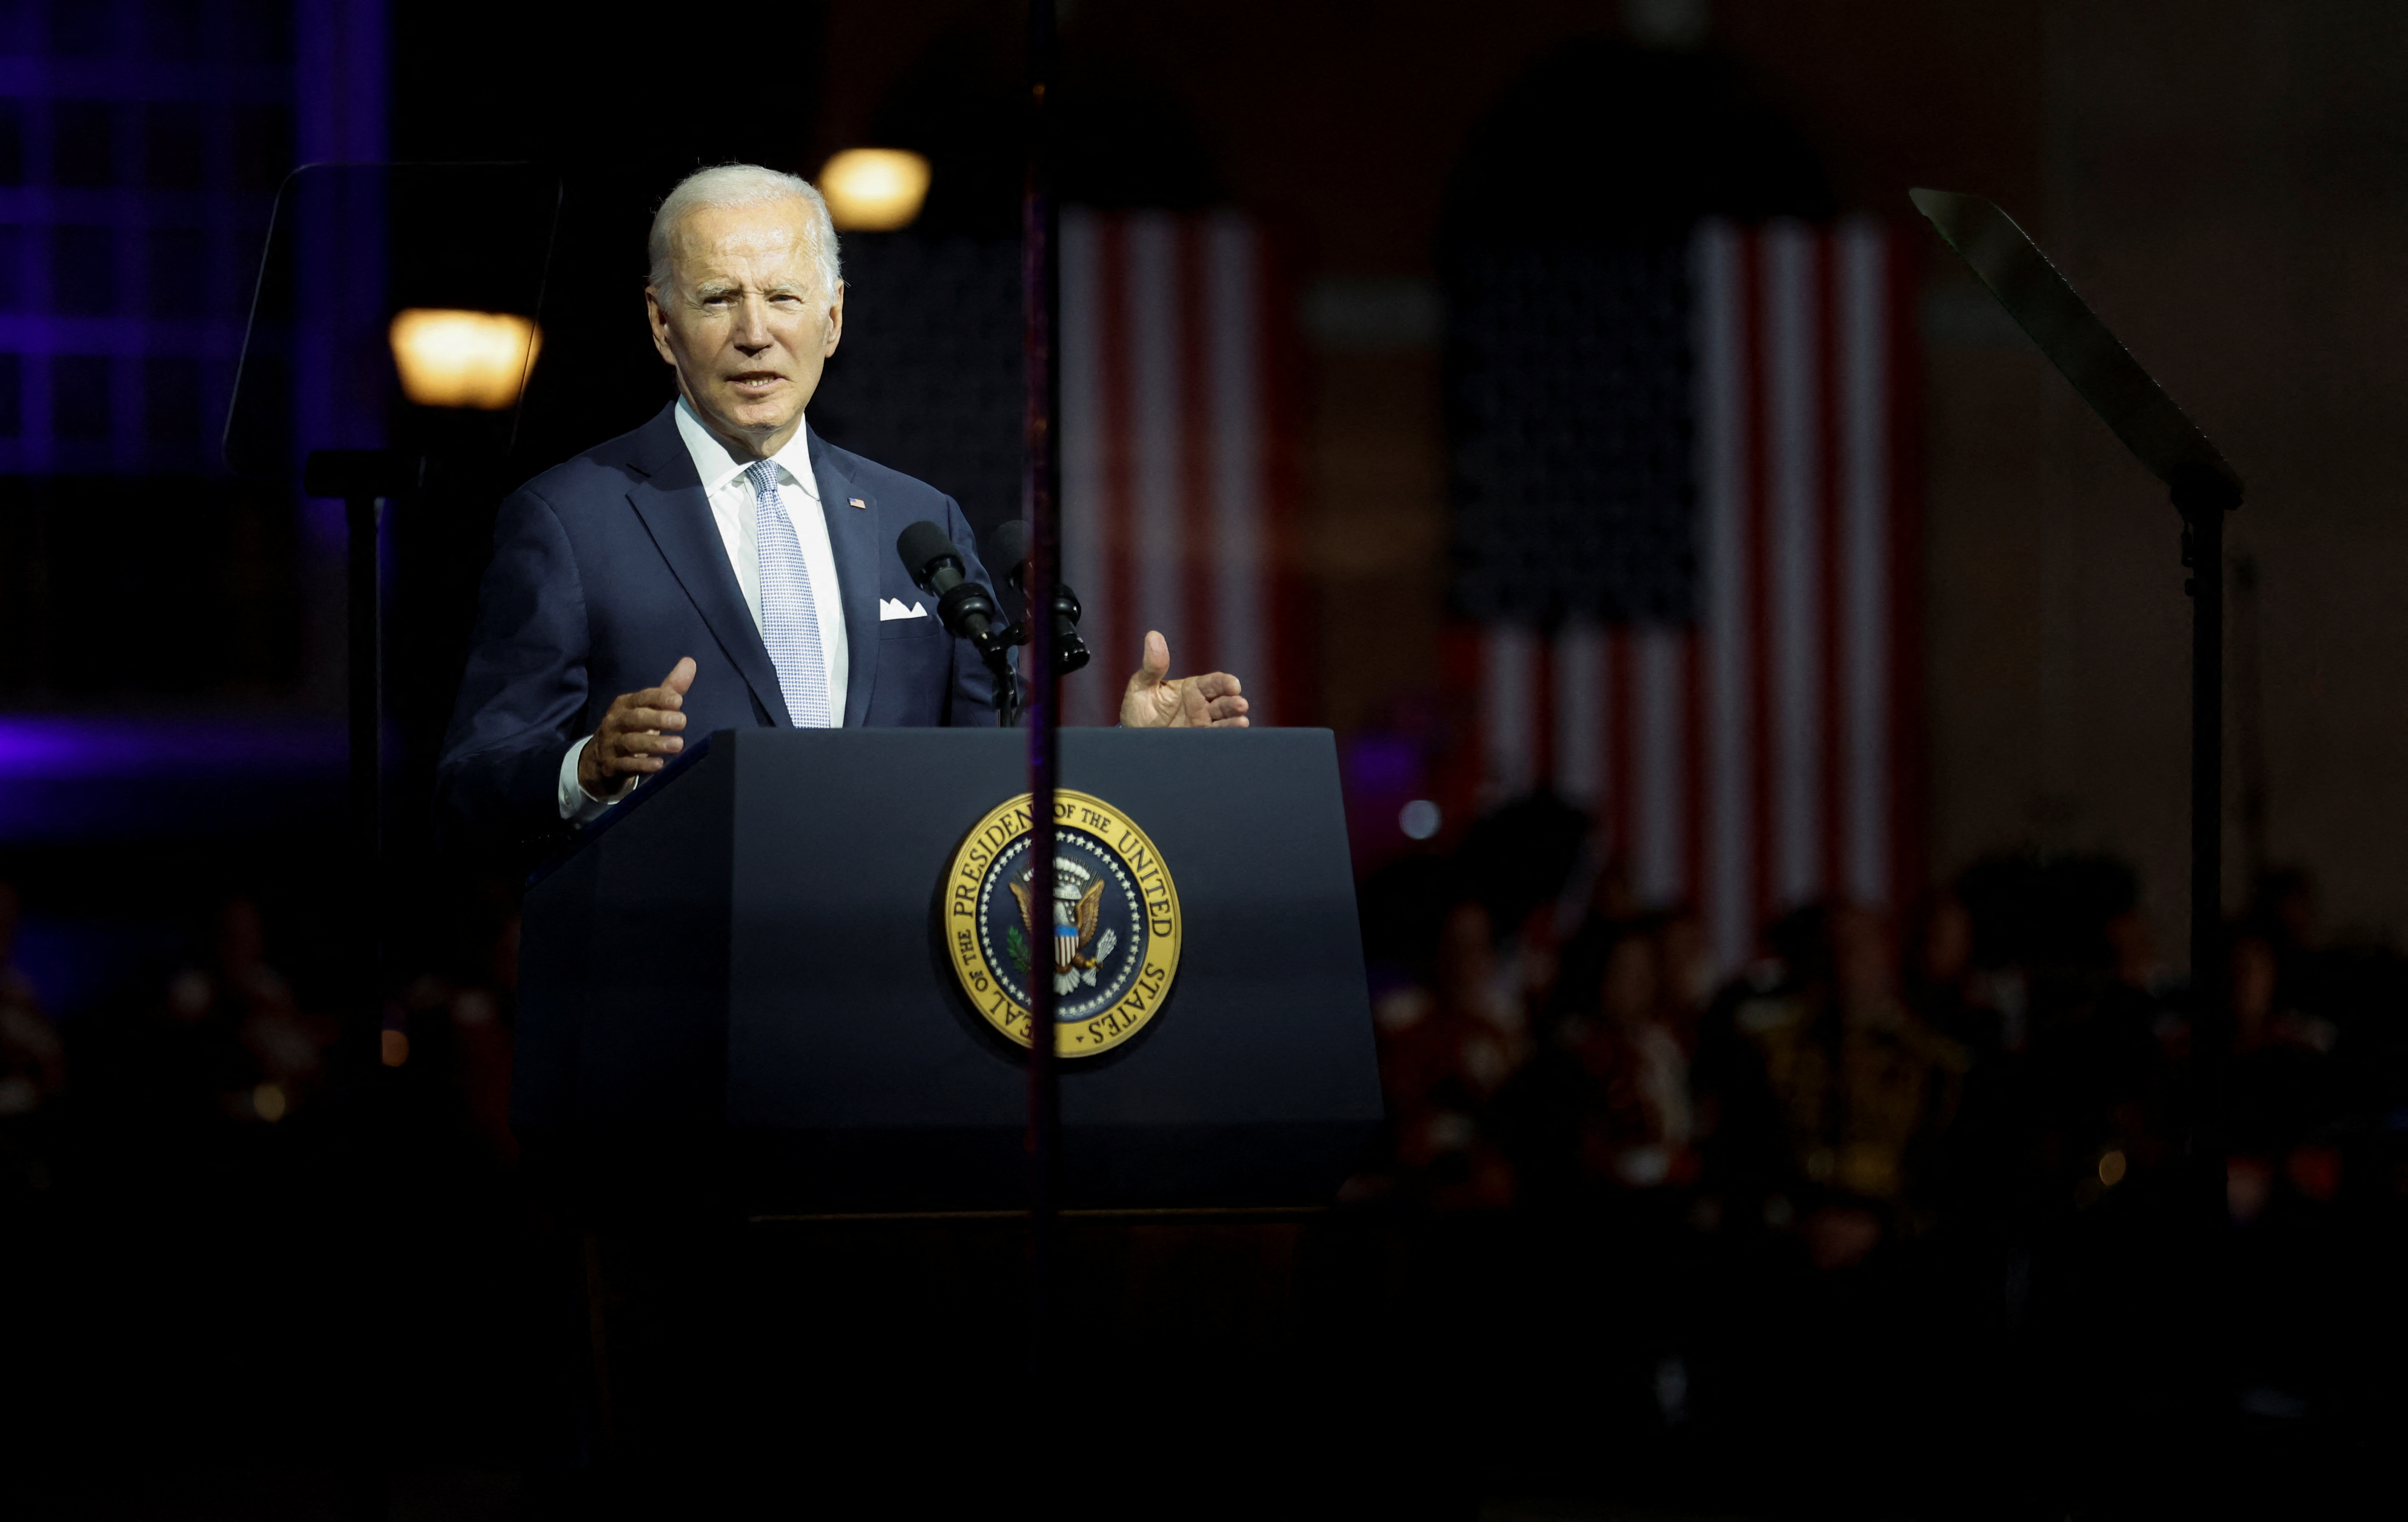 What were the main talking points in President Biden’s prime time speech to the nation?